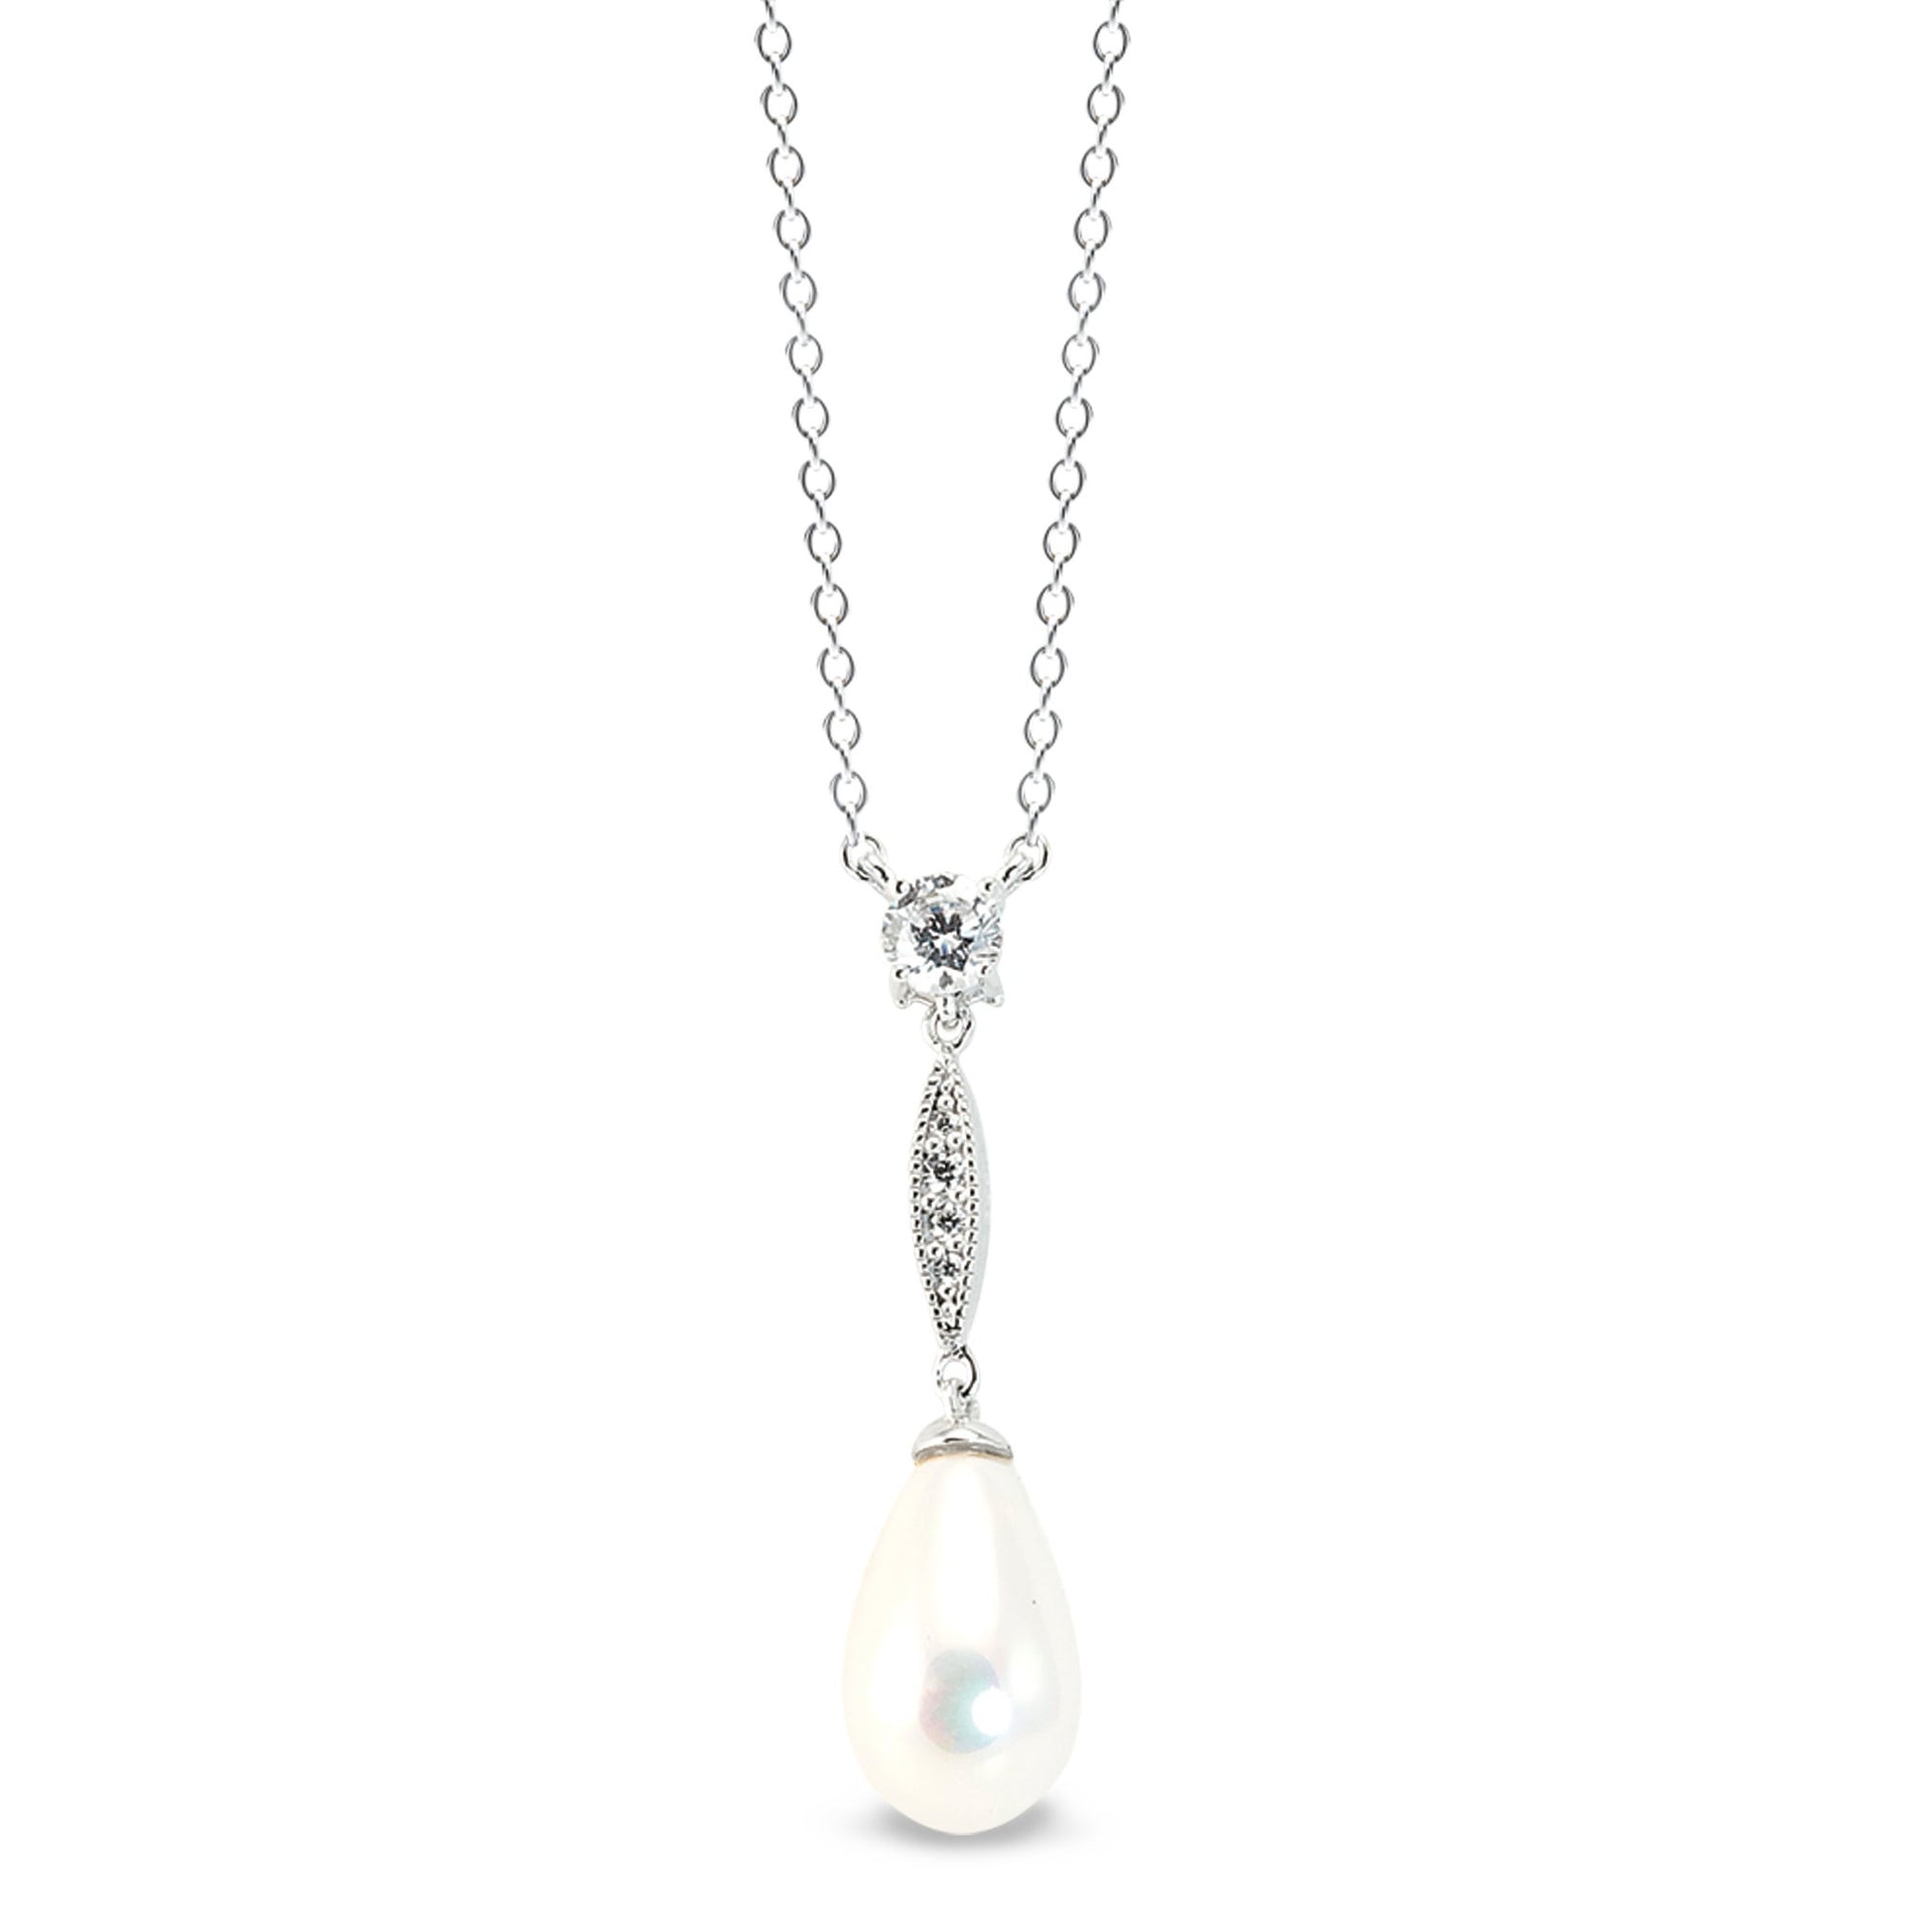 A pearl drop necklace with simulated diamonds displayed on a neutral white background.